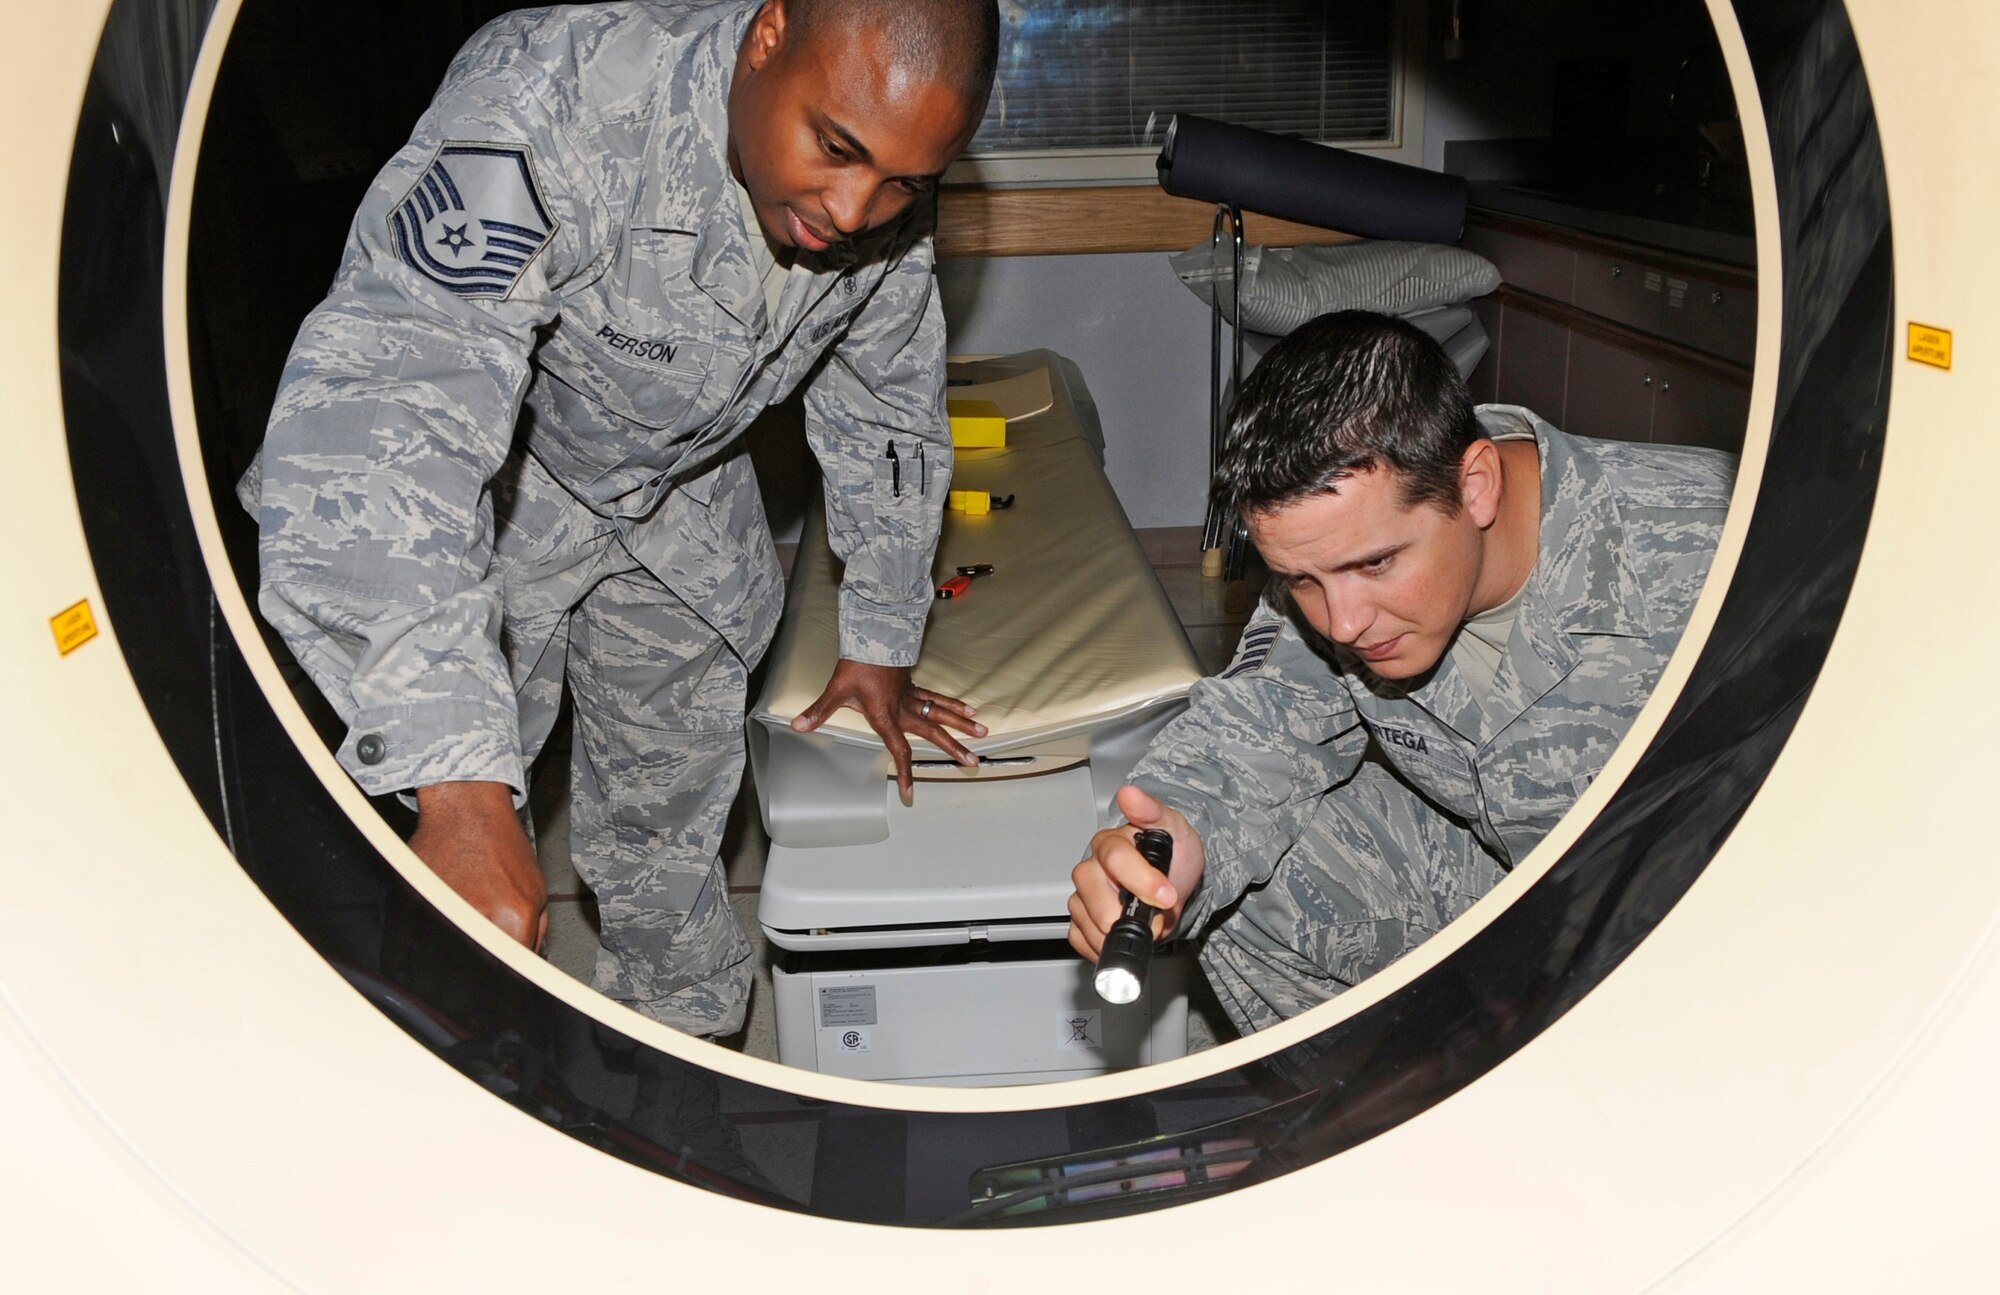 Master Sgt. Mark Person and Staff Sgt. Orlando Ortega, members of the 2nd Medical Group Medical Logistics Flight, inspect the inside of the computerized tomography scanner Aug. 22 as part of a routine inspection at the Medical Clinic on Barksdale Air Force Base, La. The team inspects all medical machines on base to make sure they are working correctly at all times. (U.S. Air Force photo/Airman 1st Class Andrea F. Liechti) (RELEASED)